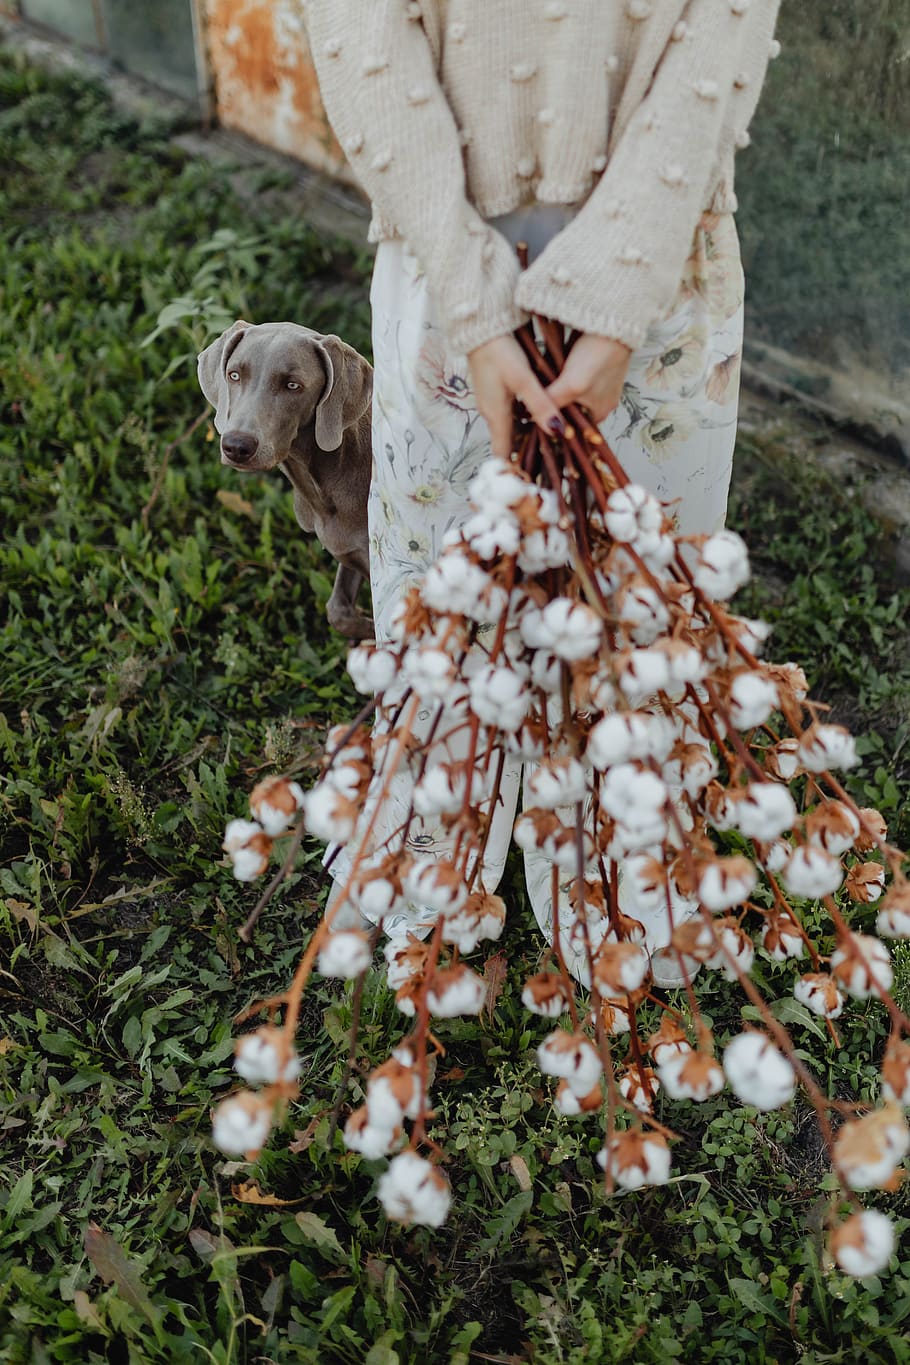 cotton, branches, woman, outdoor, nature, glasshouse, natural, farm, Weimaraner, dog